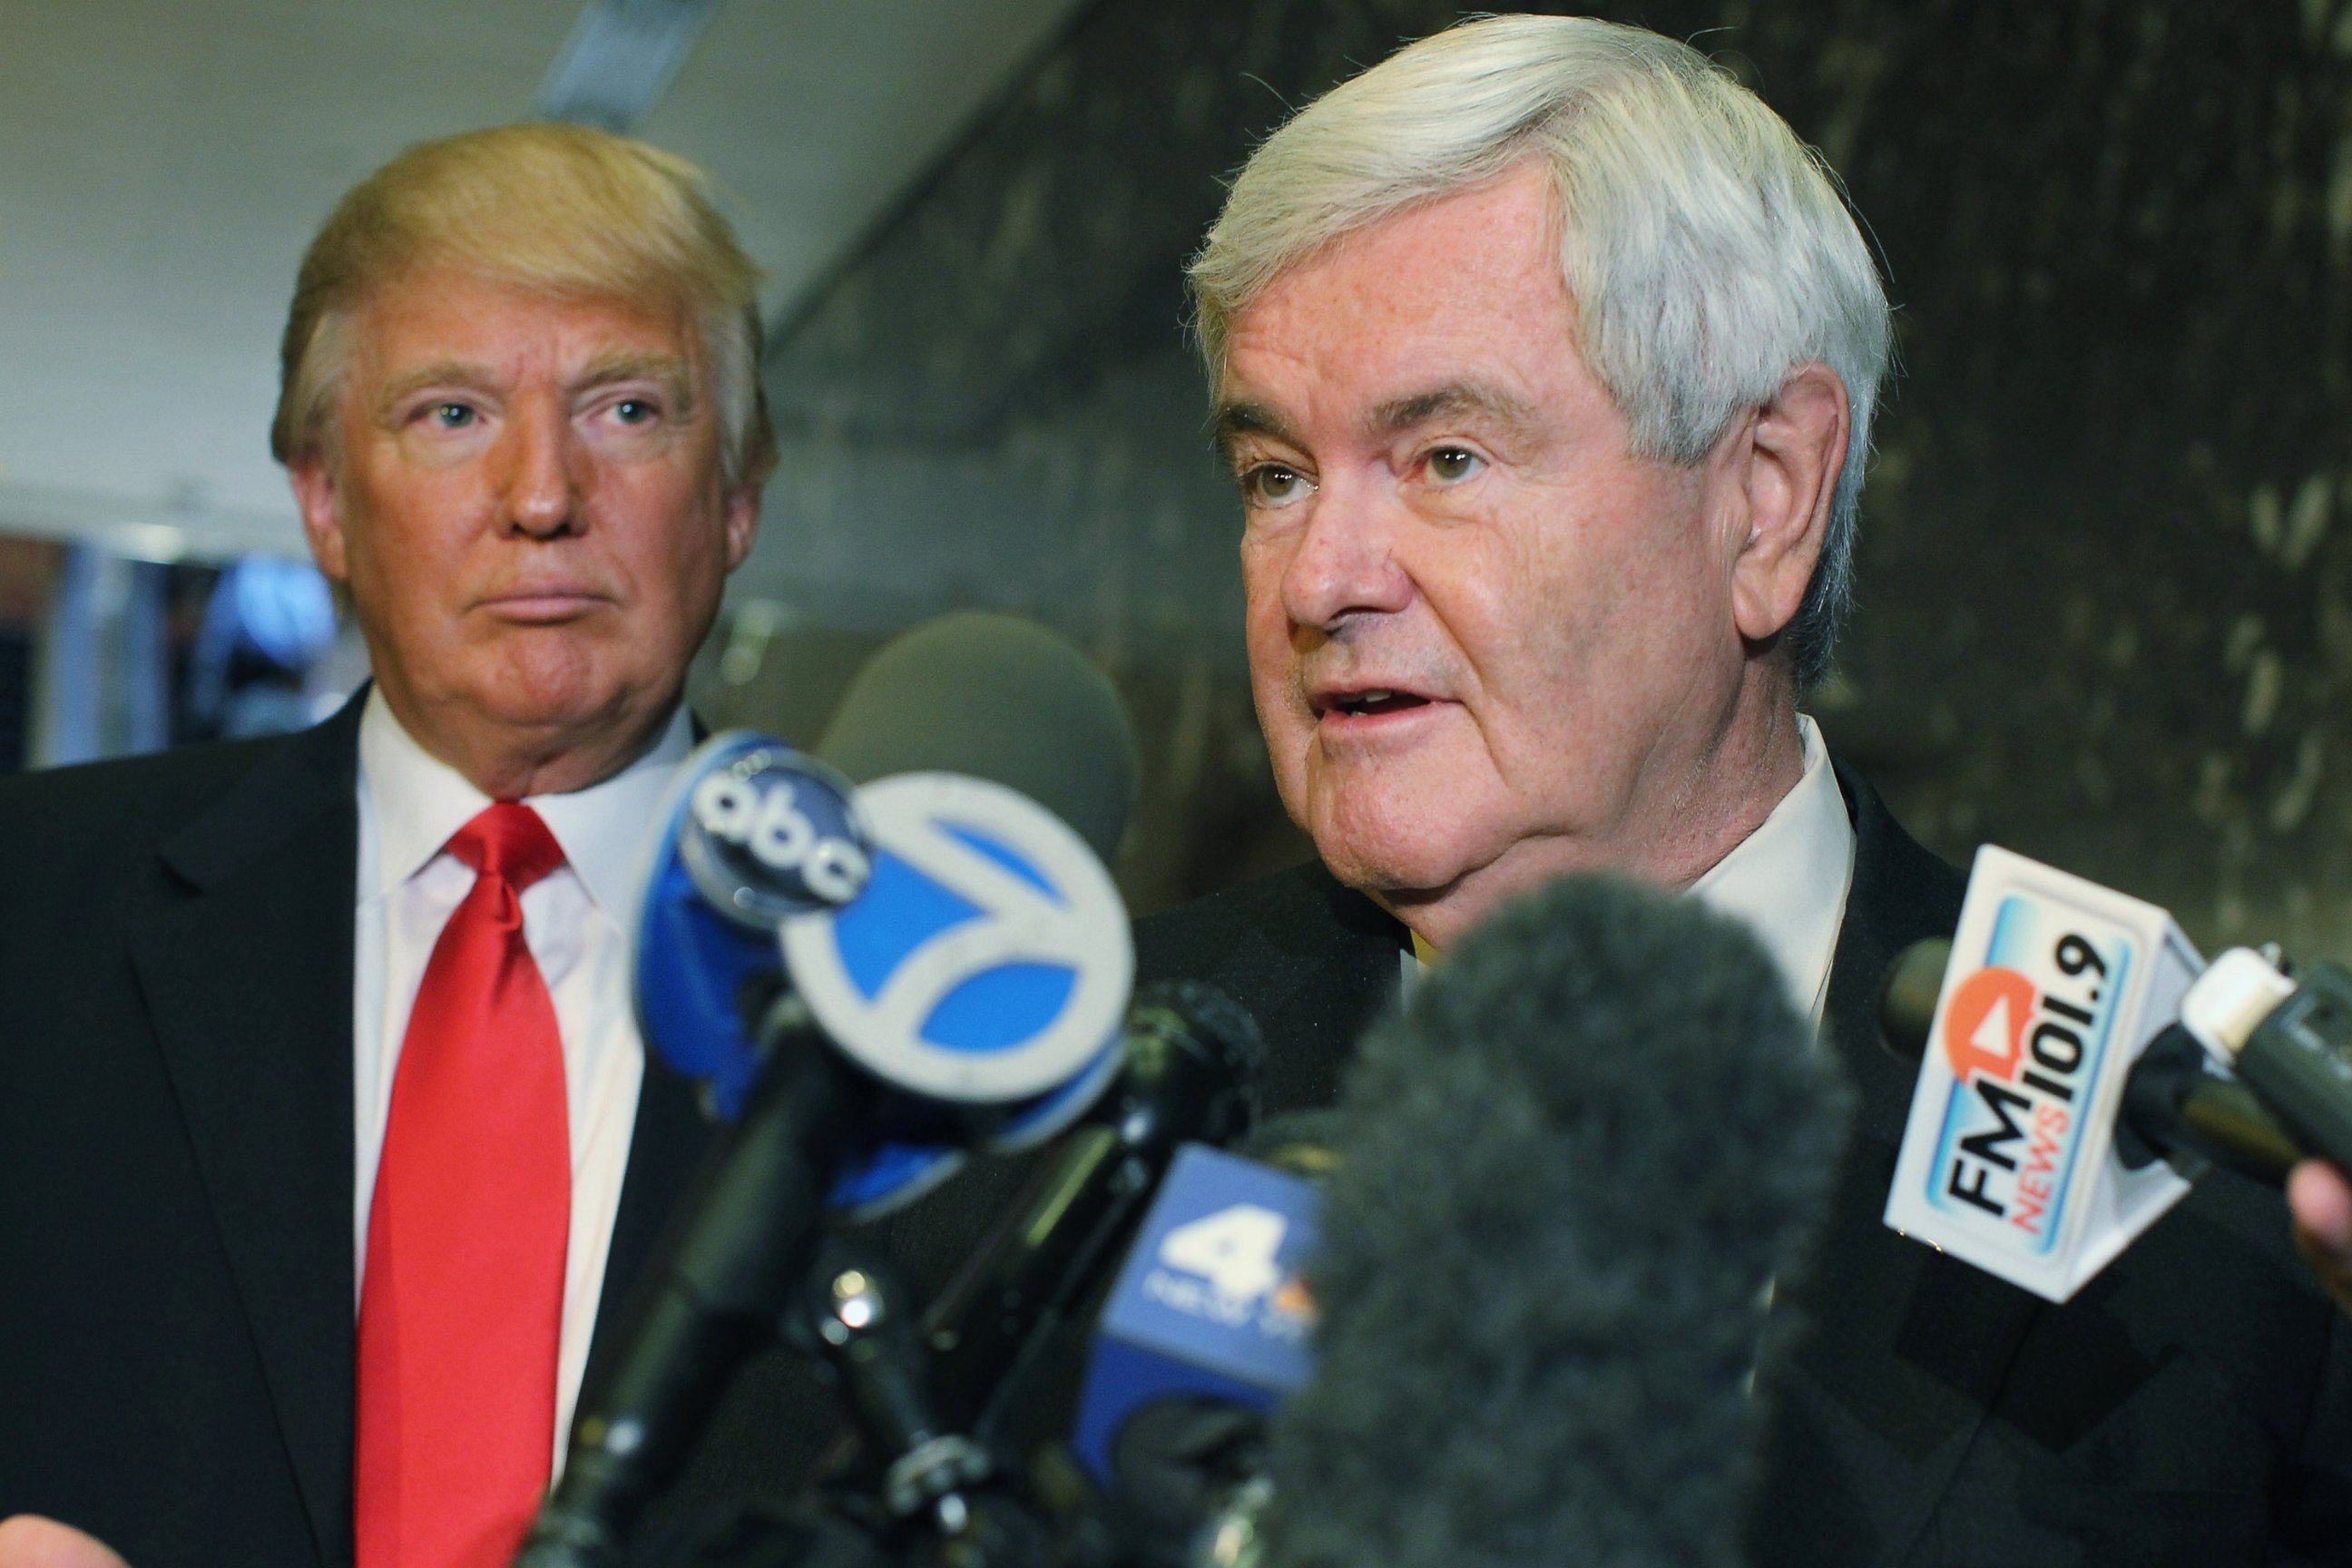 PHOTO: Newt Gingrich speaks to the media as Donald Trump listens at Trump Tower following a meeting between the two, Dec. 5, 2011 in New York City. 